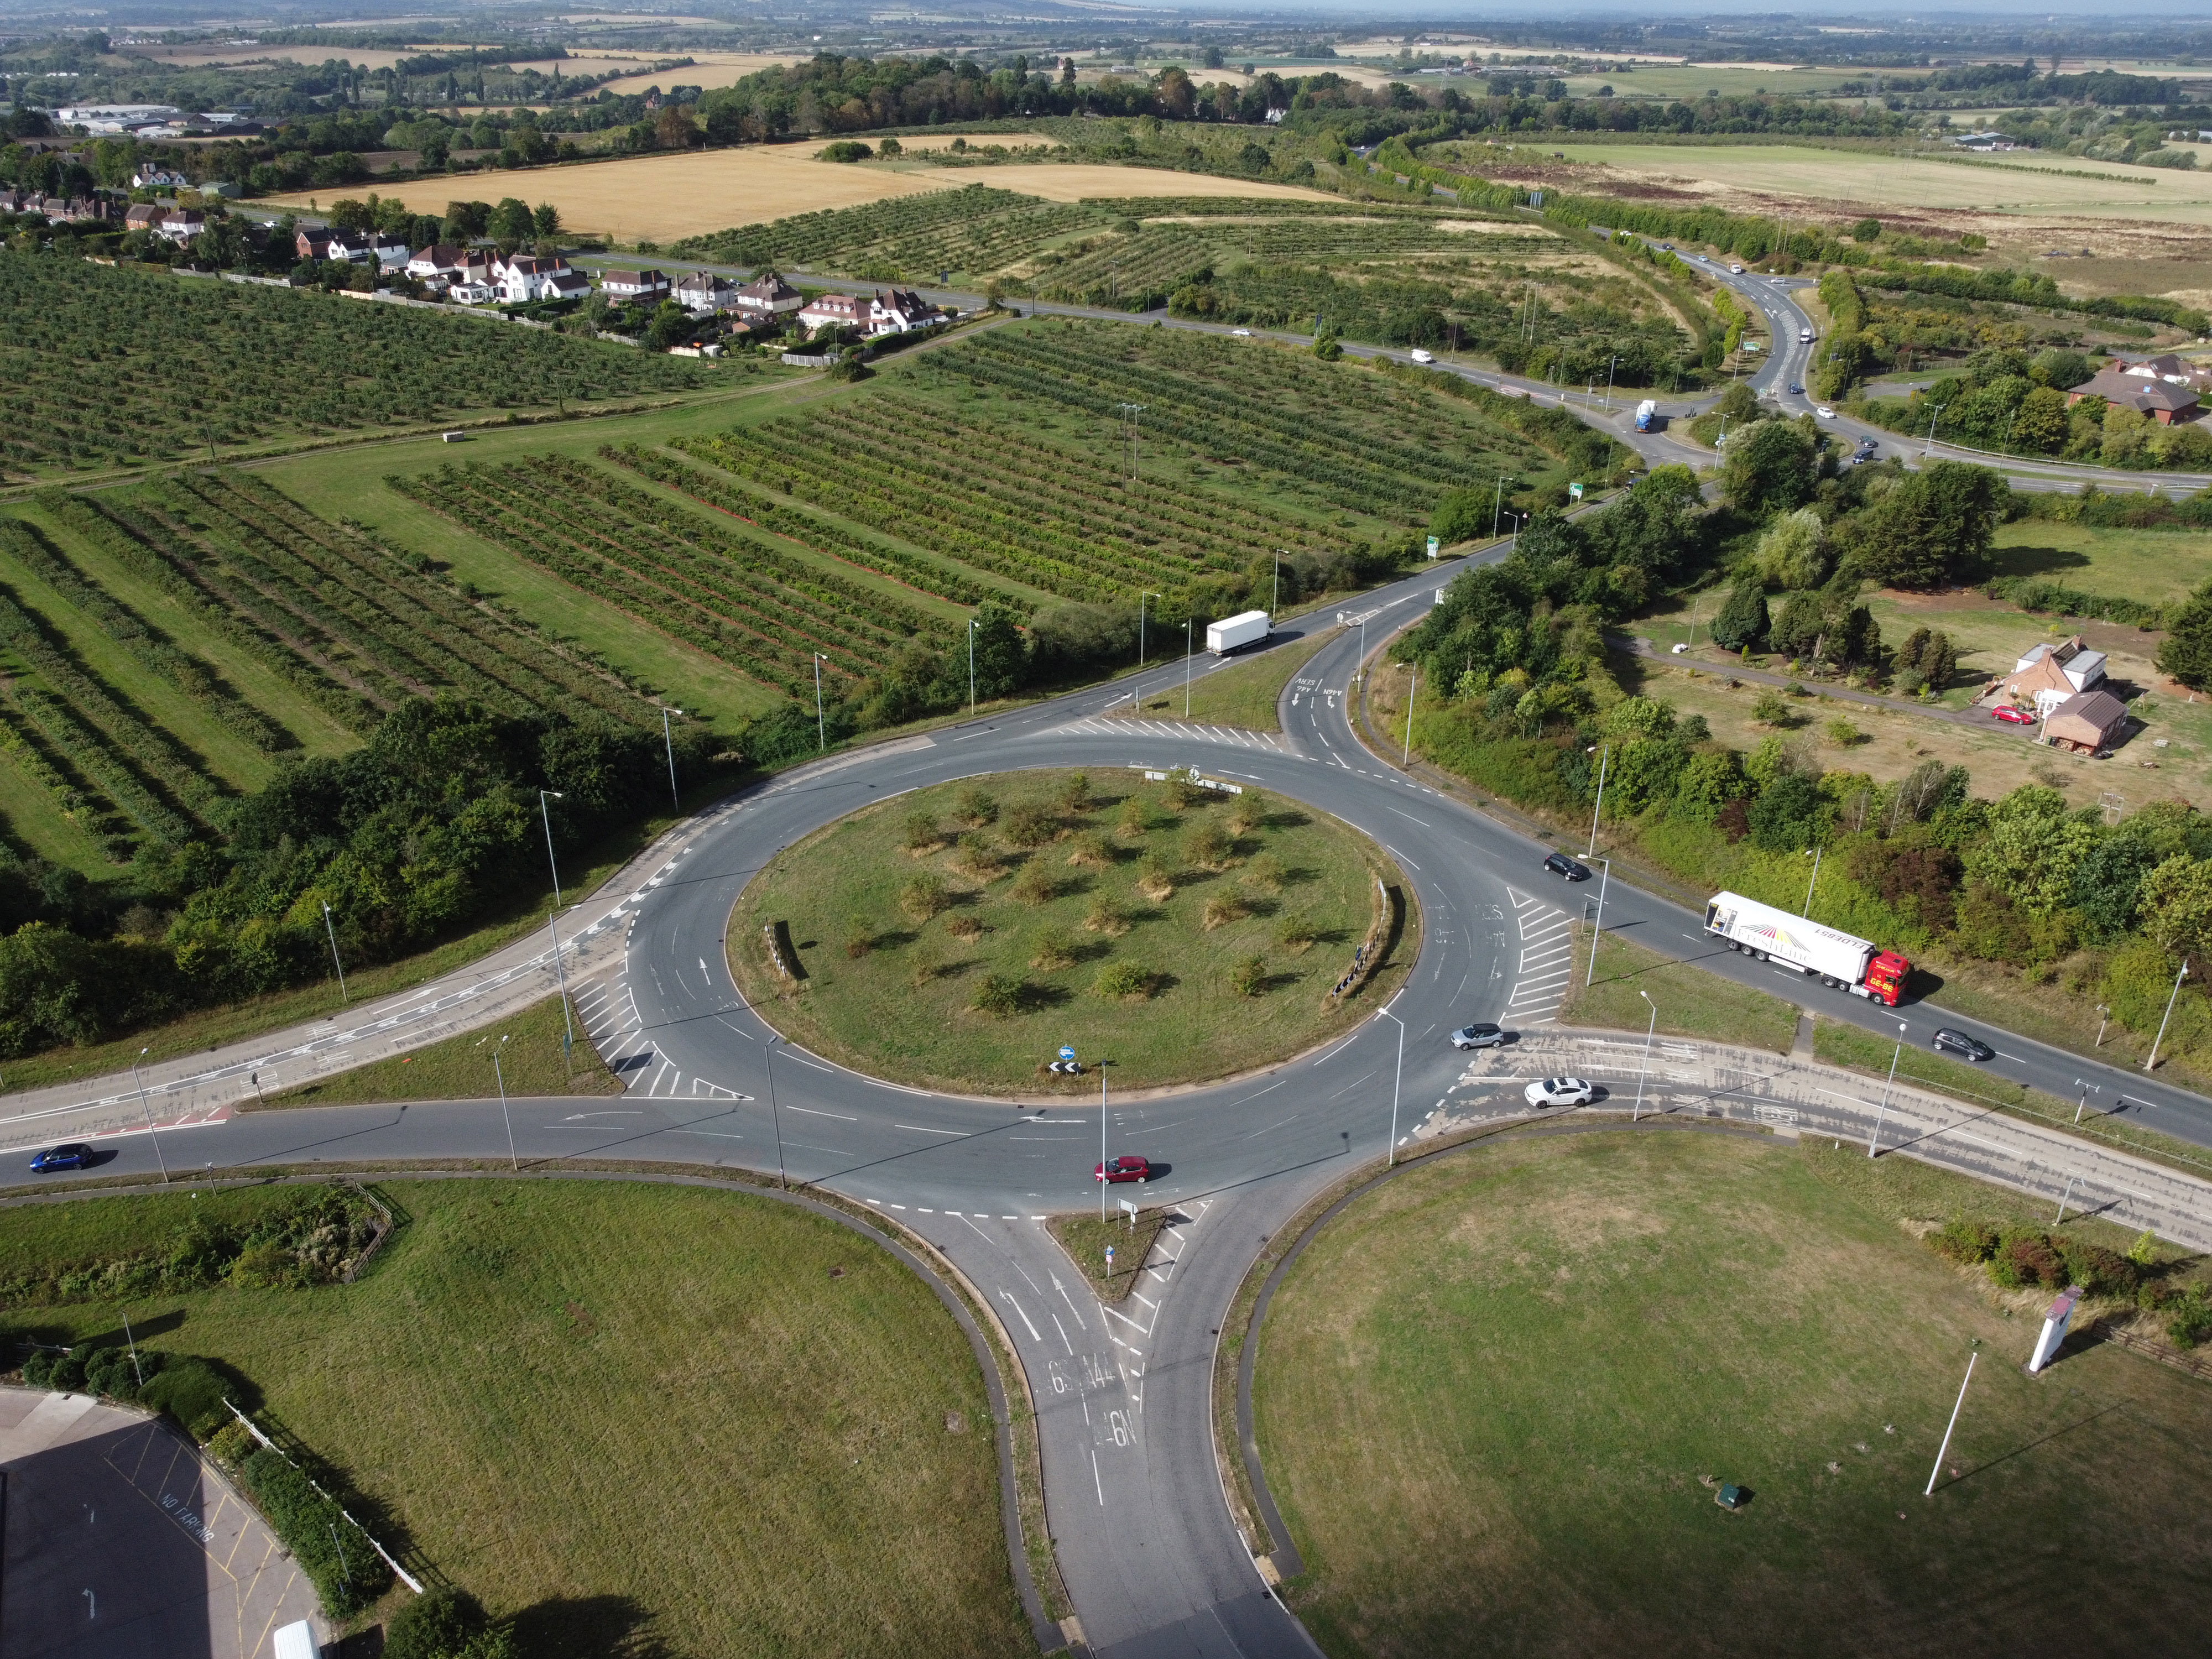 20-year vision for A46 corridor will boost economy by £7.1 billion